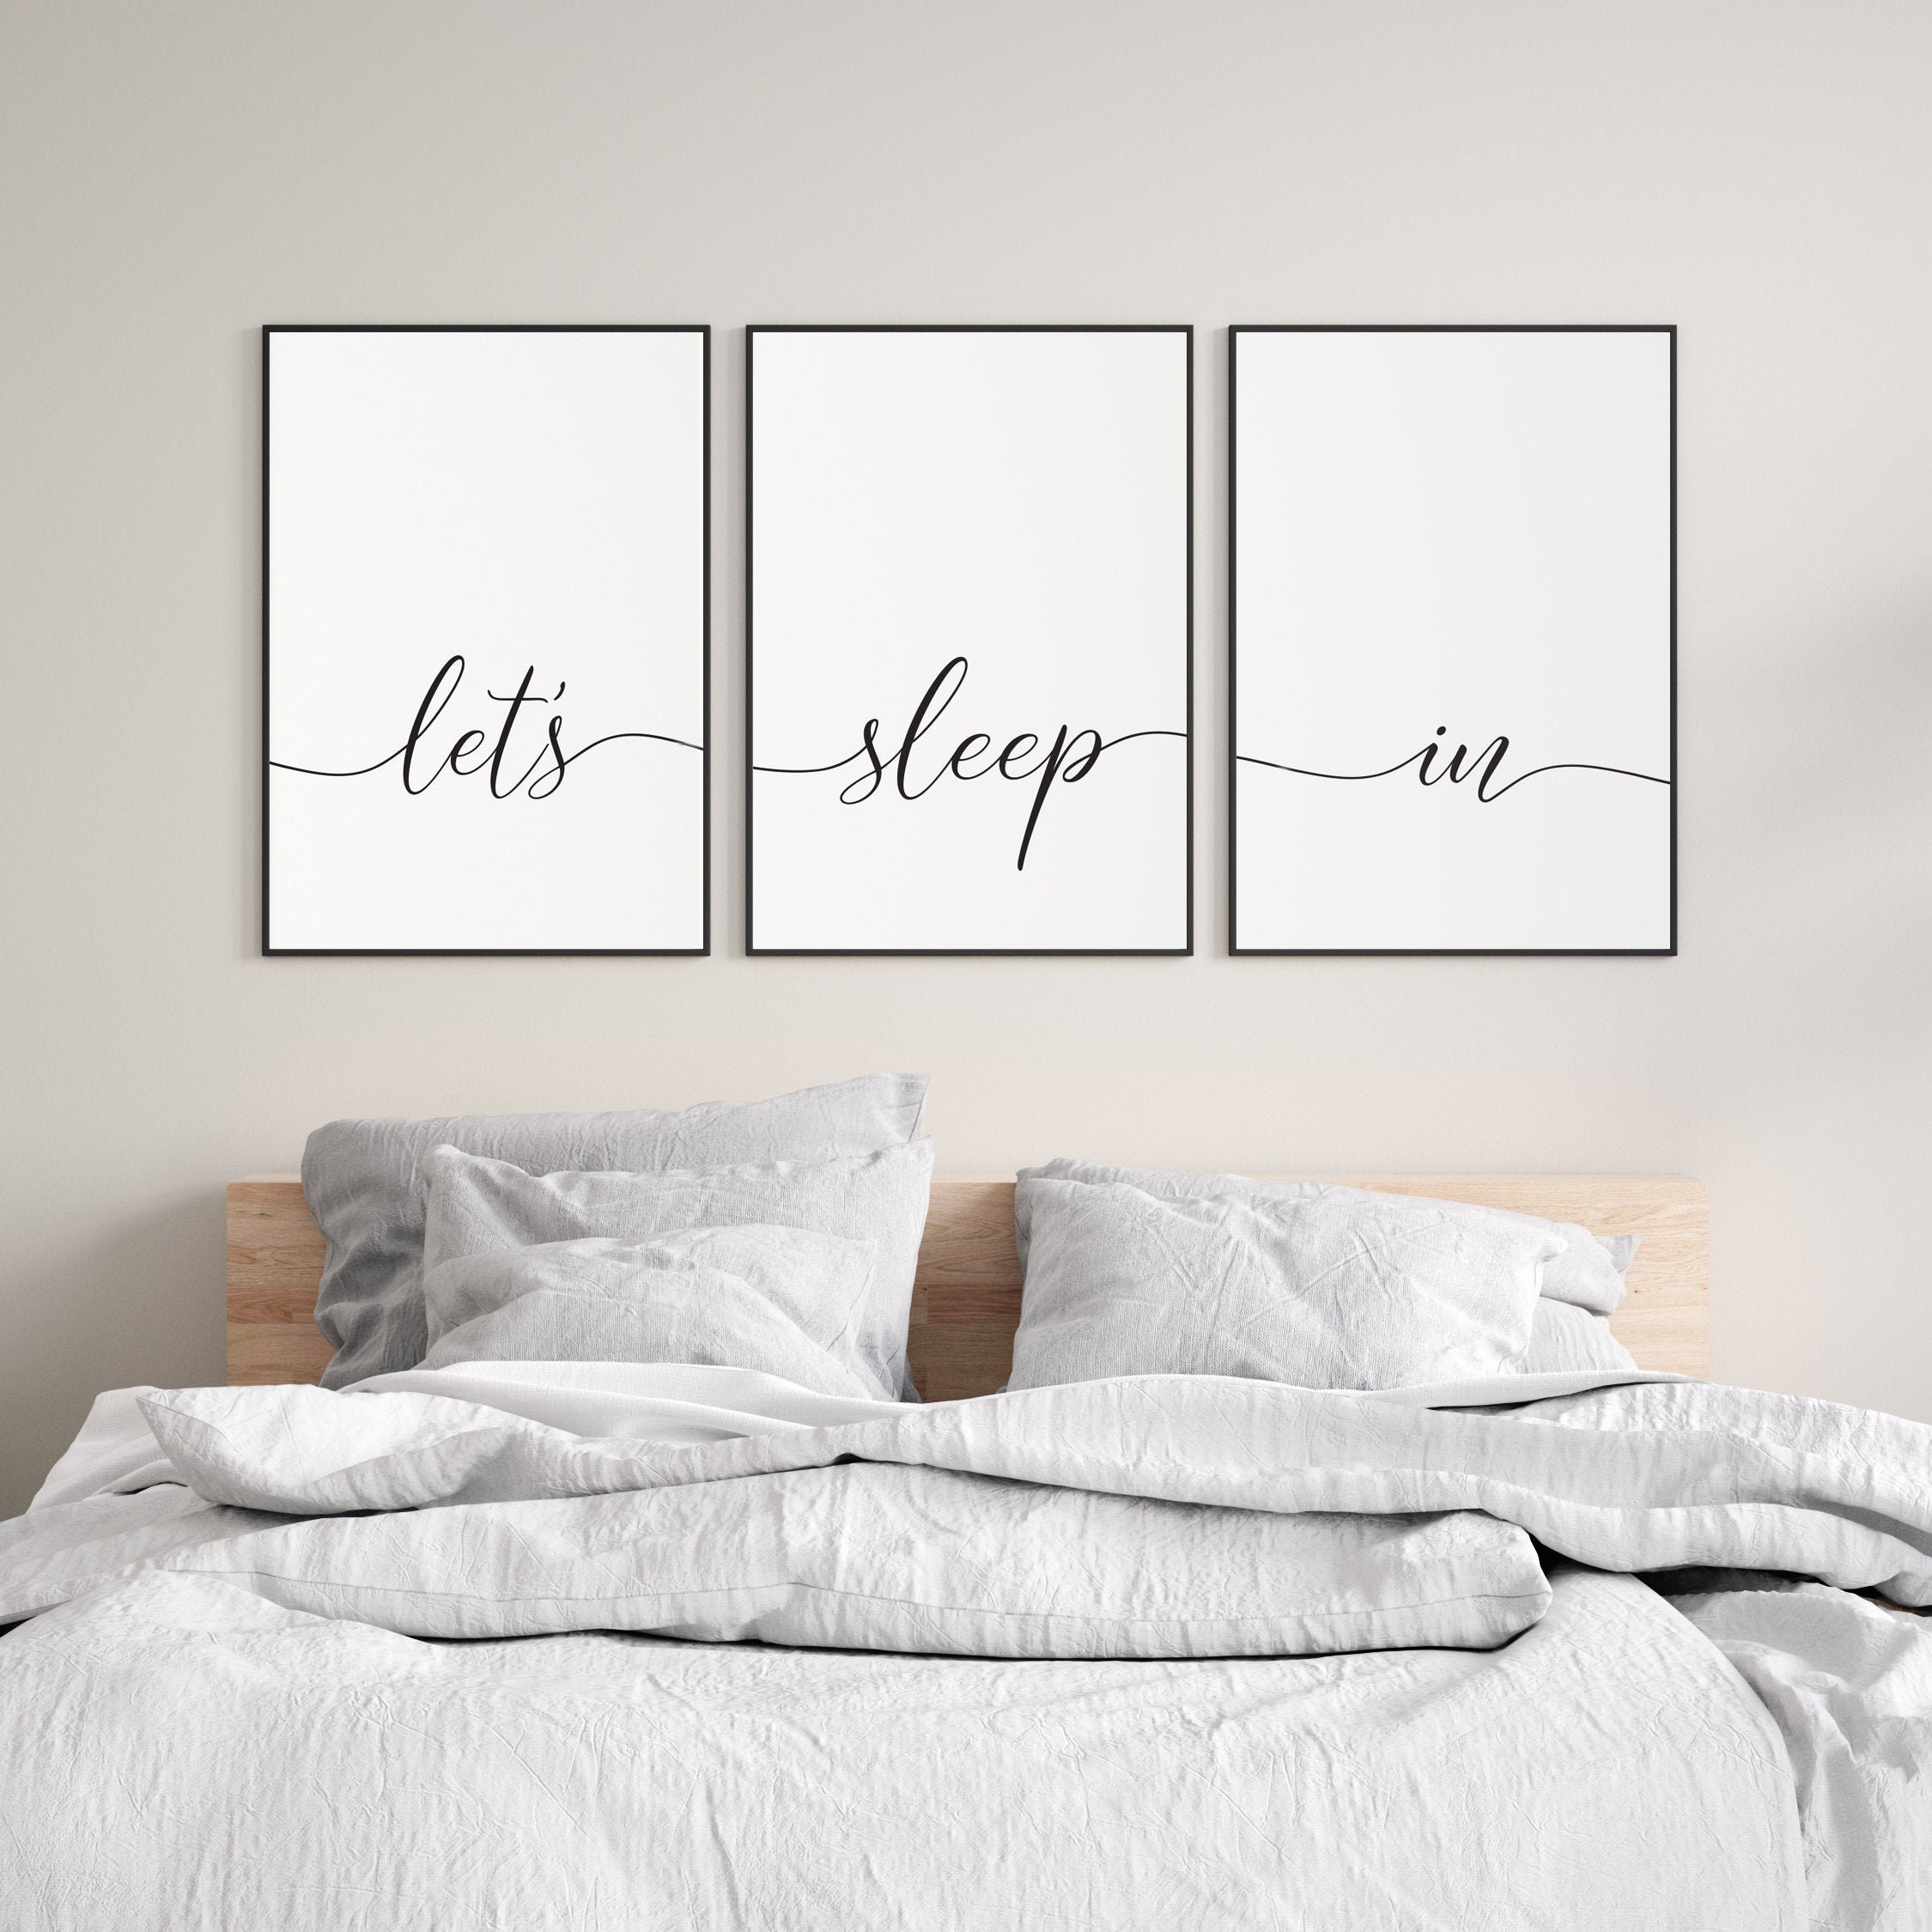 Bedroom wall decor over bed lets sleep in set of 3 prints - Etsy 日本